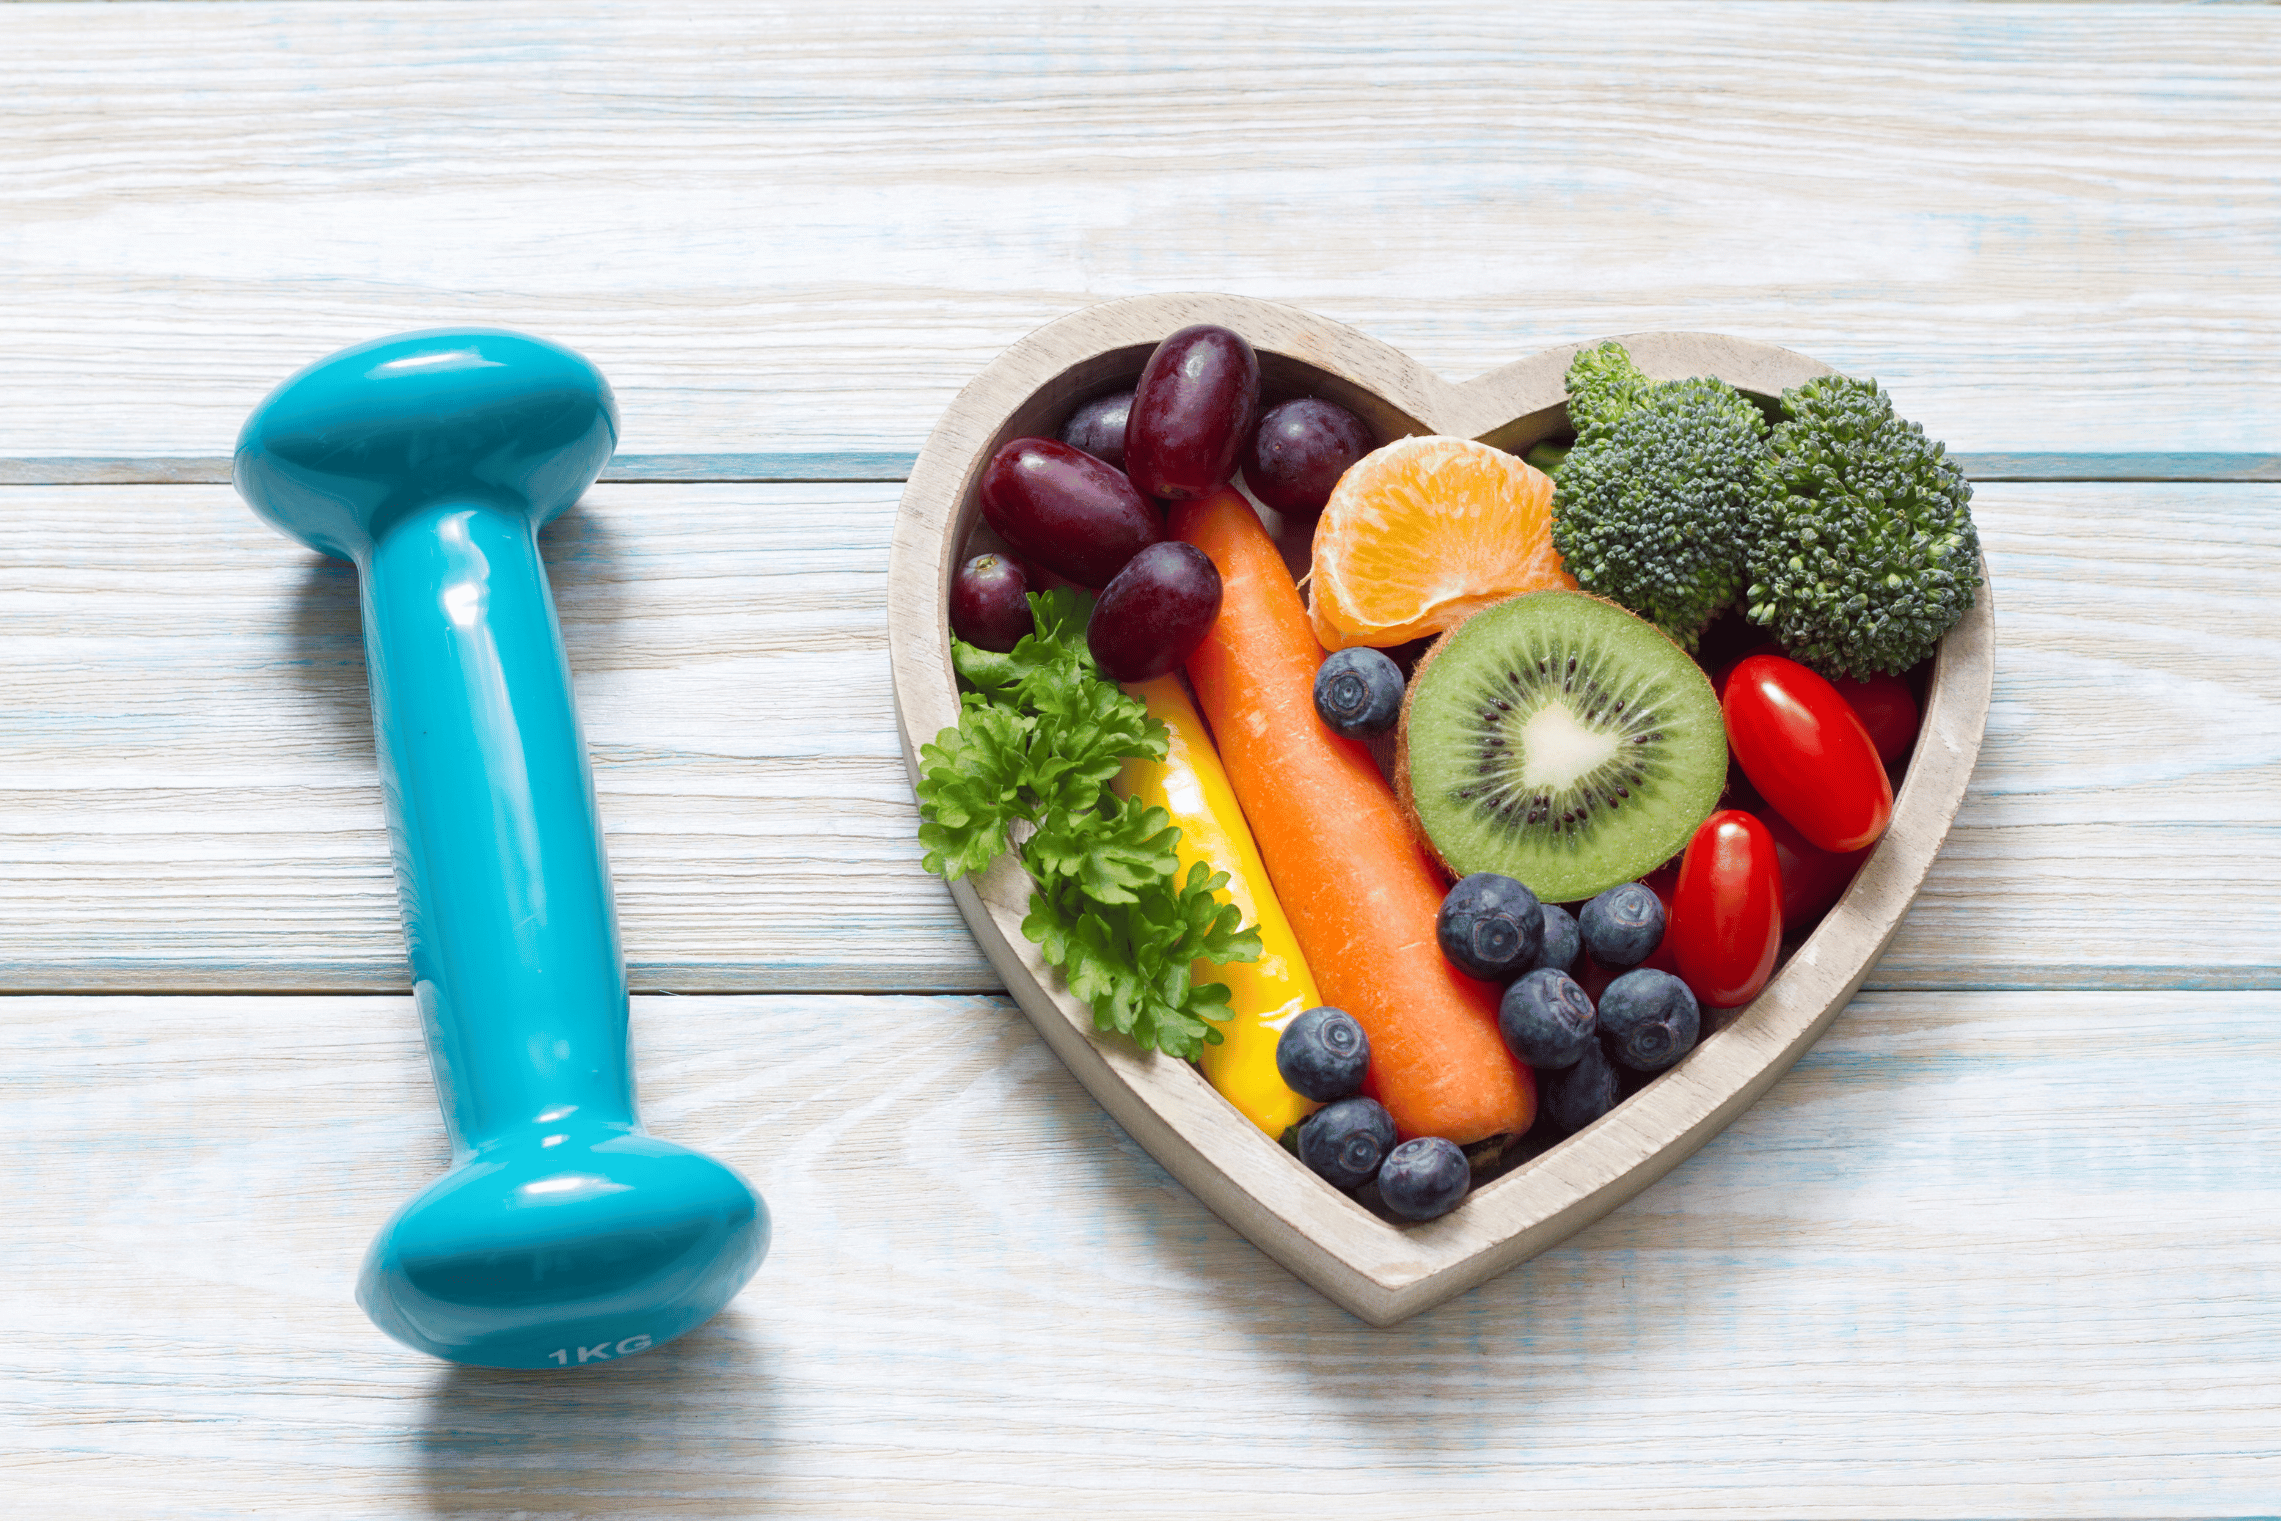 An image of veggies and an exercise barbell